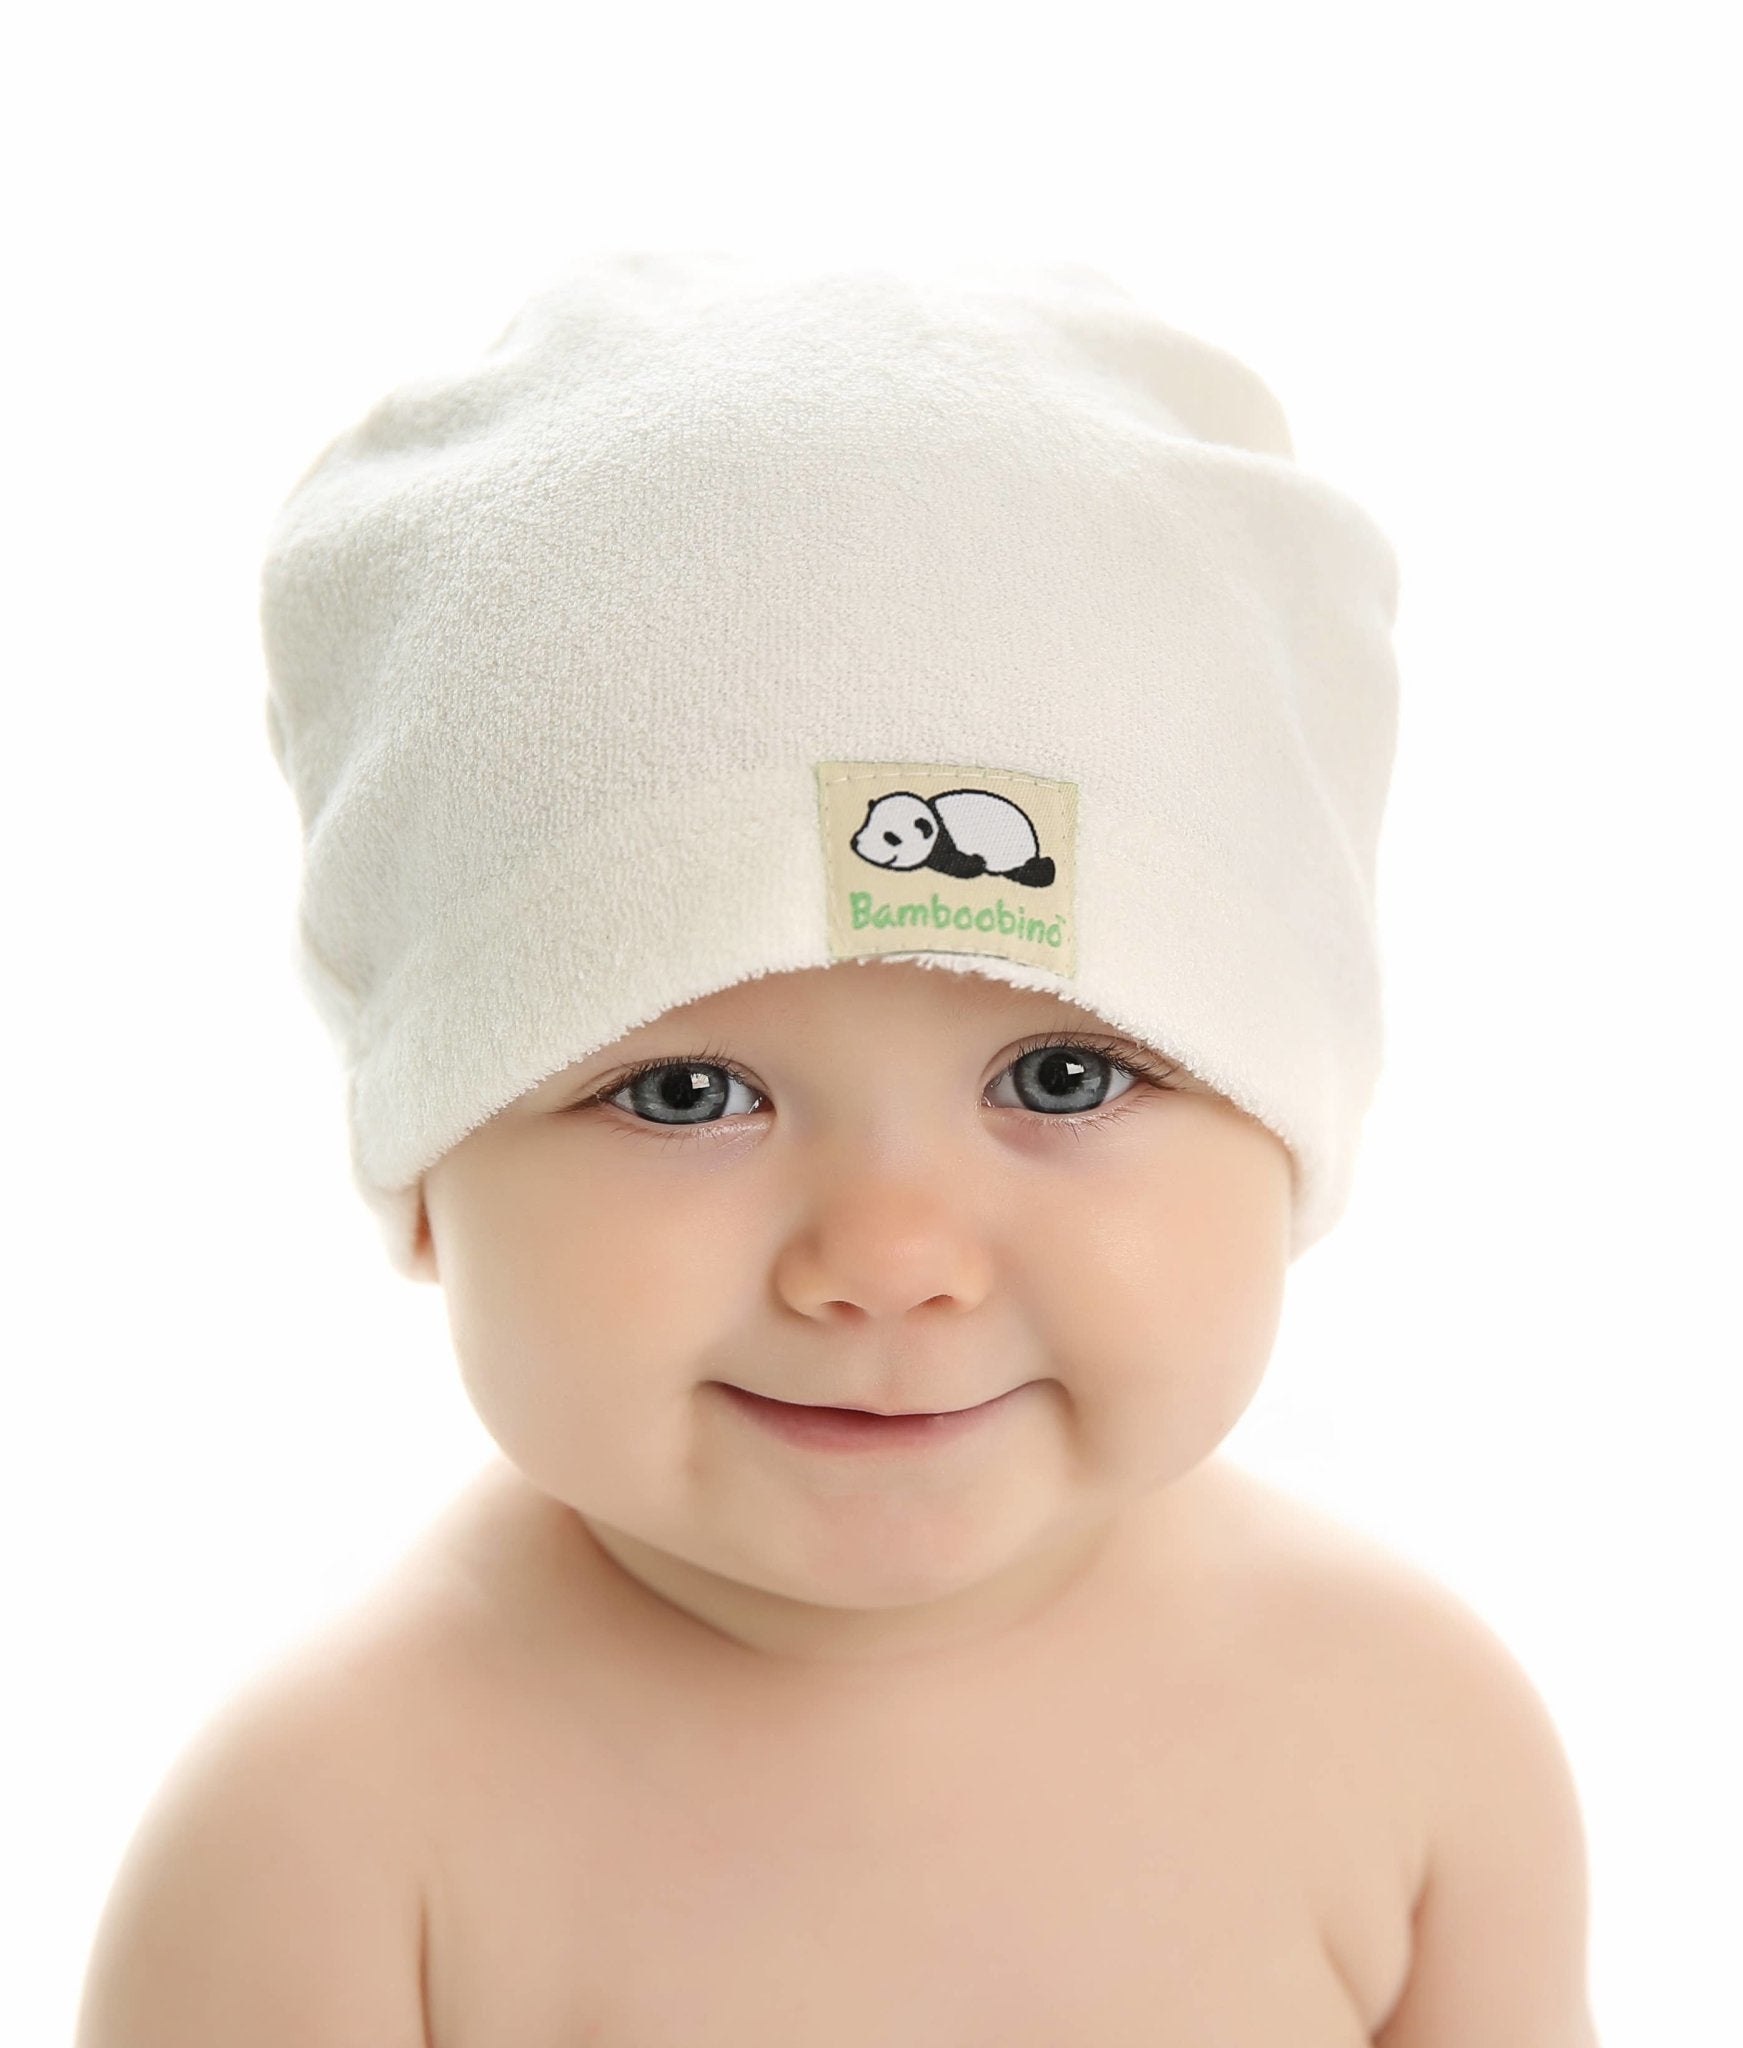 After-Bath Hat for Baby - L'Atelier Global